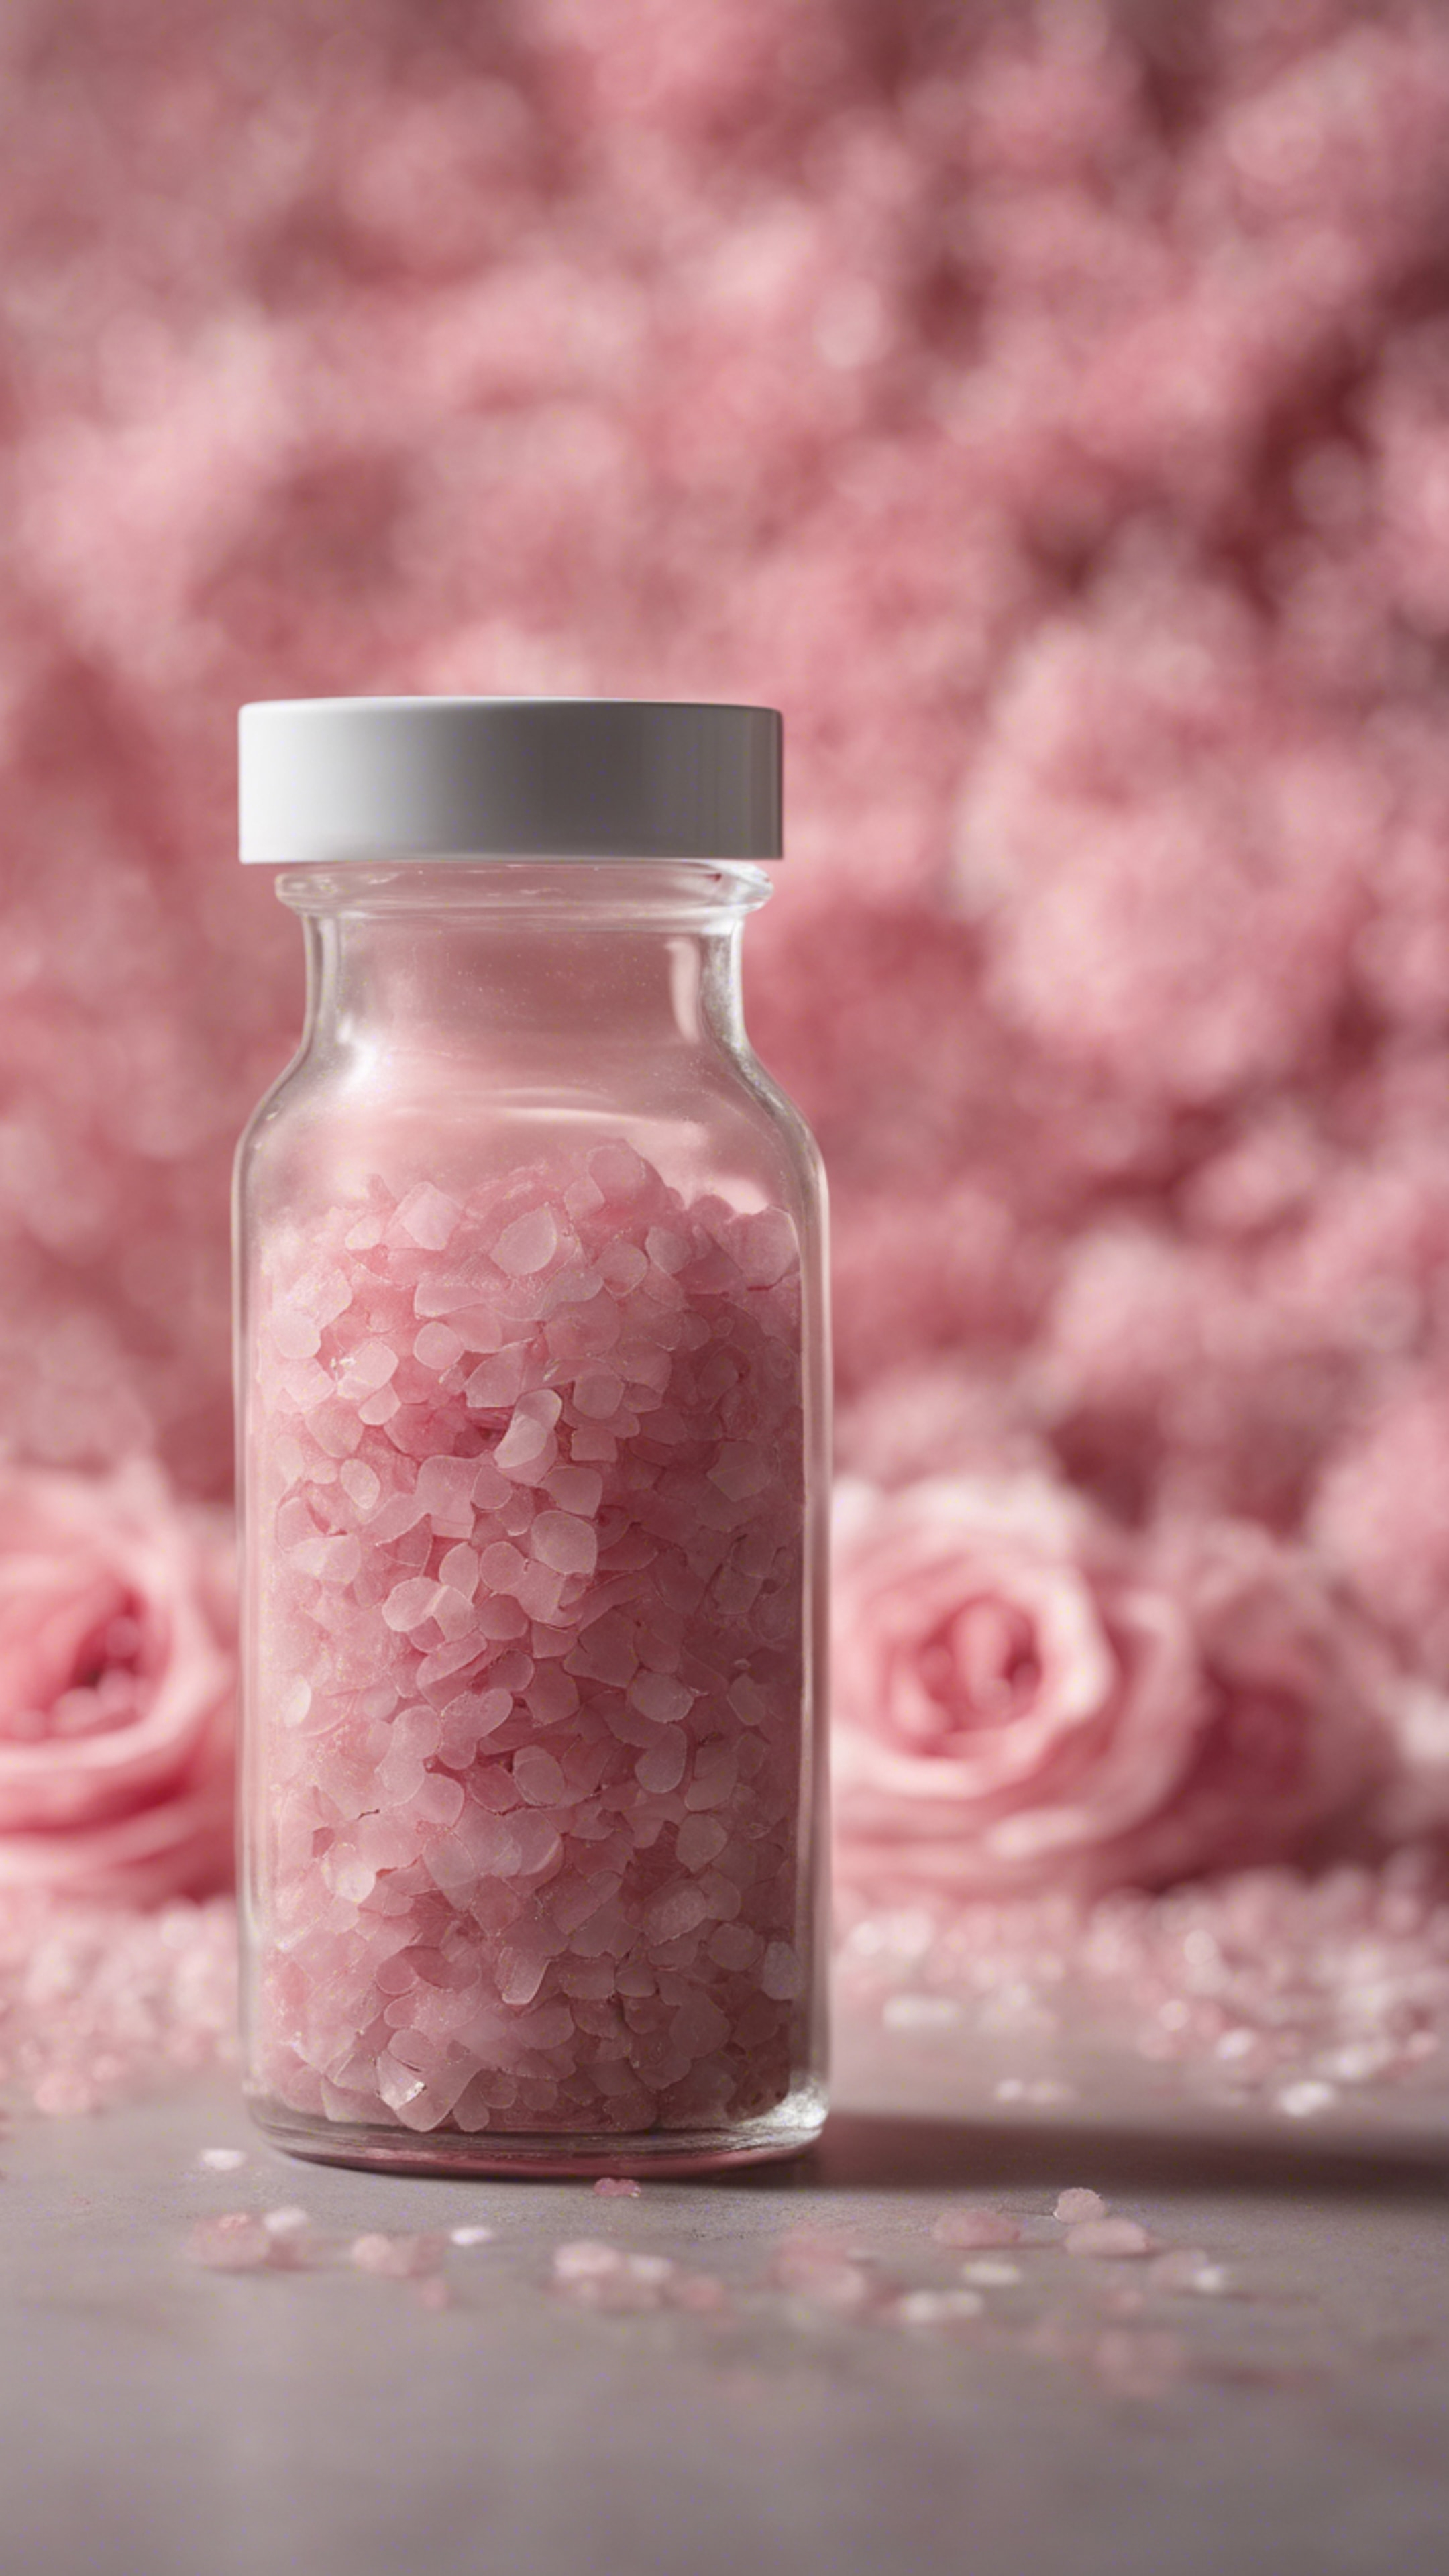 A modern, minimalist, recycled glass bottle filled with rose-colored bath salts against a concrete backdrop. Kertas dinding[d3334b5ed23046b498f0]